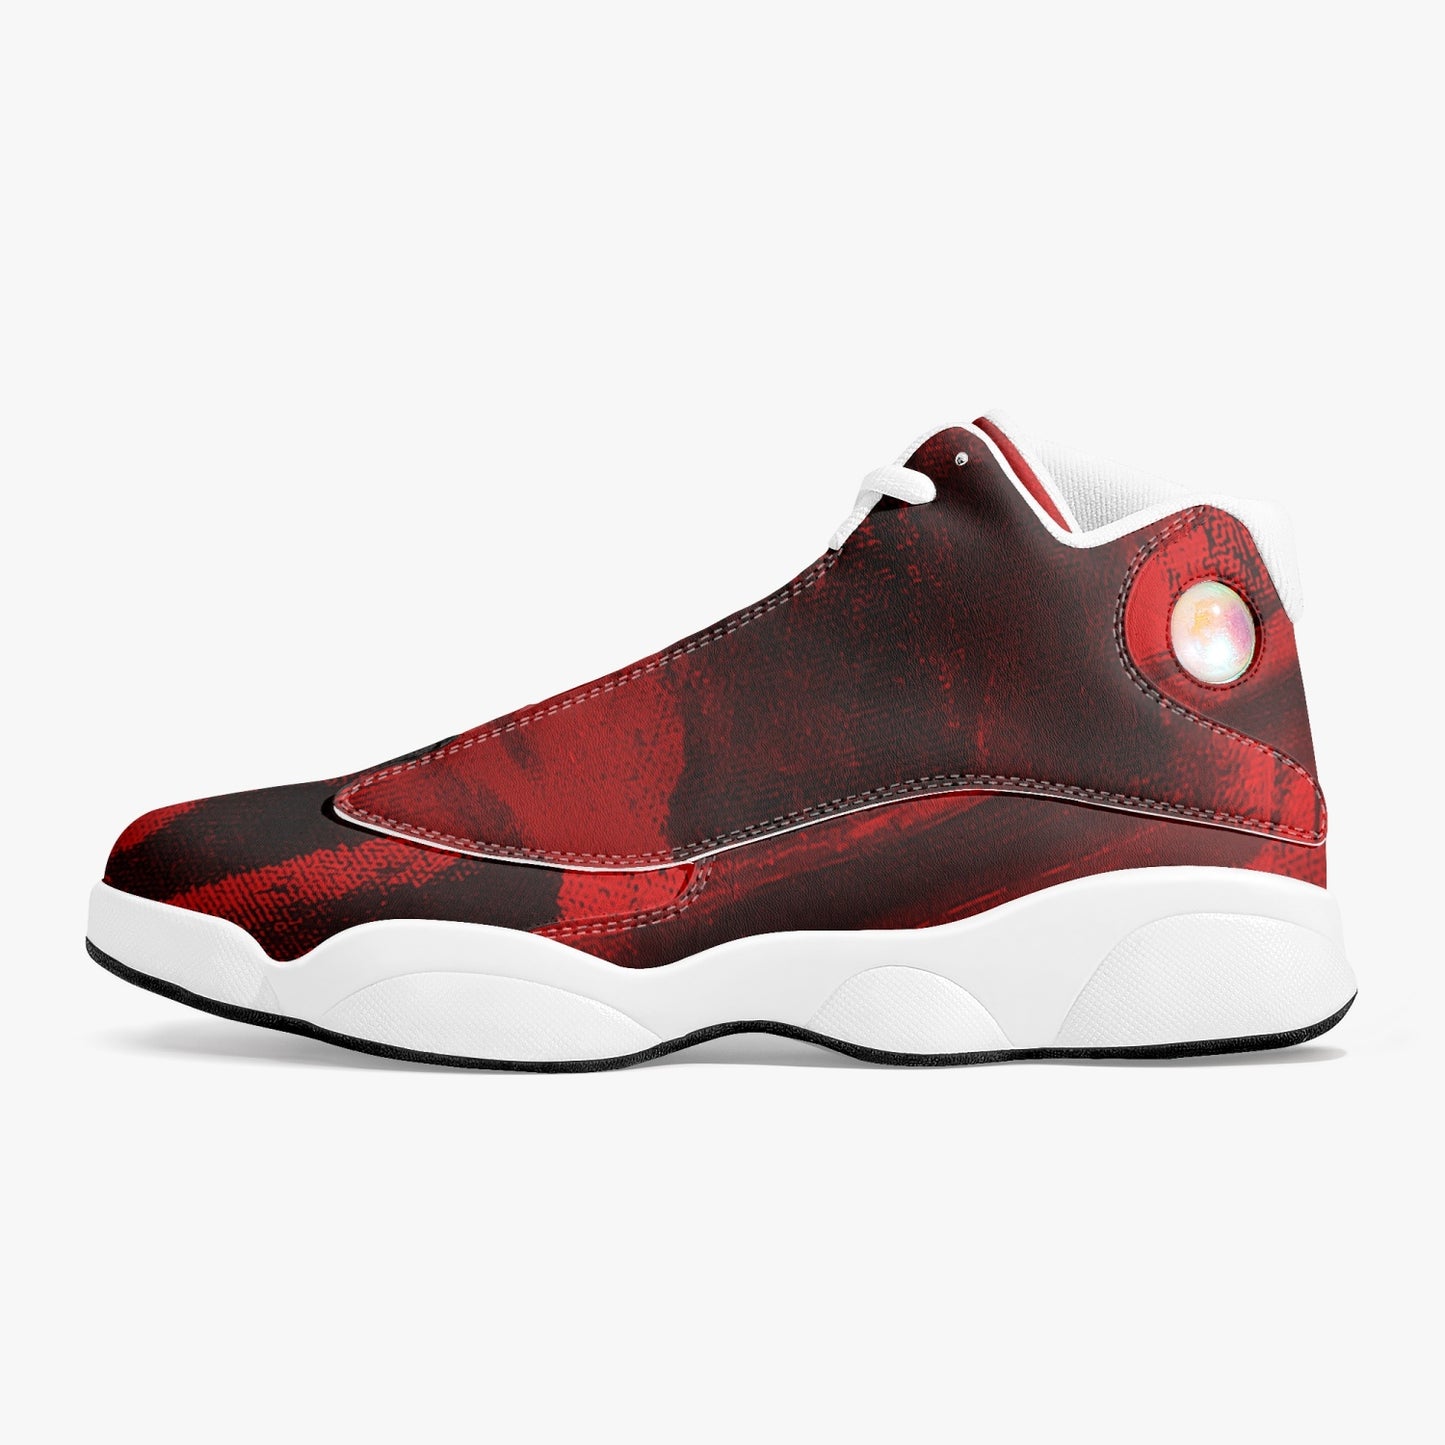 "Redone" premium leather basketball sneakers